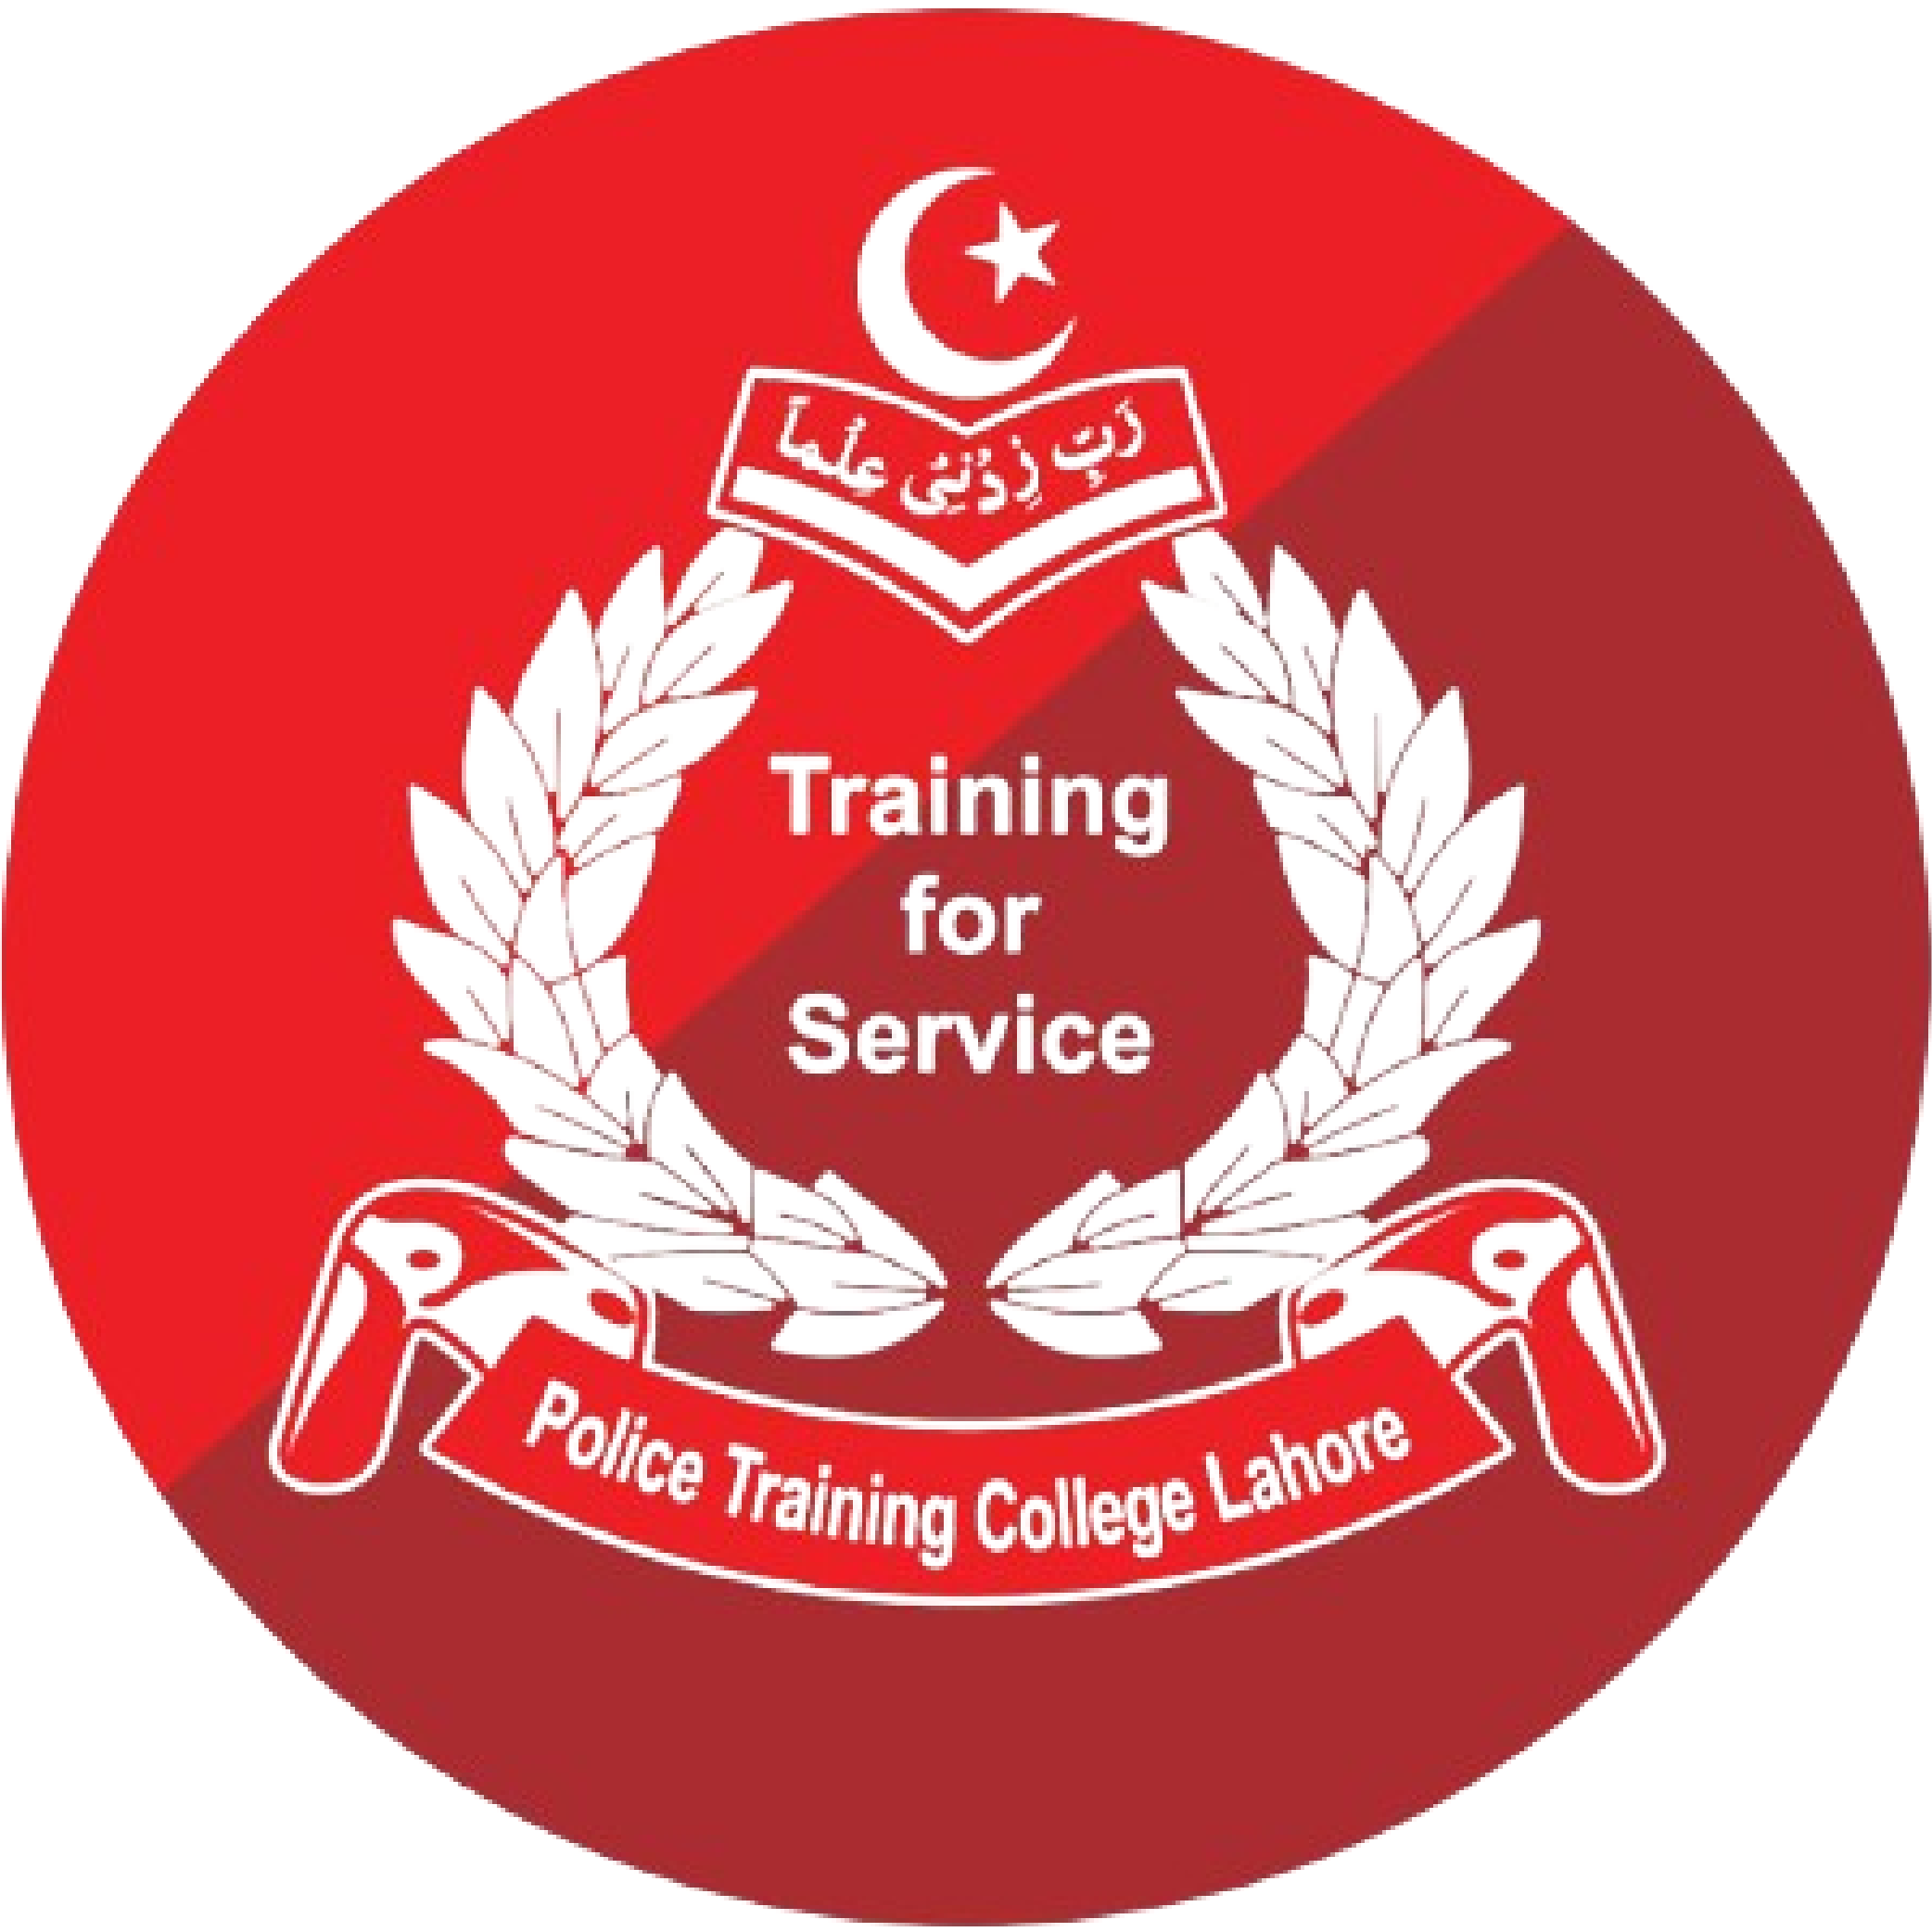 Police Training Collage Lahore 2